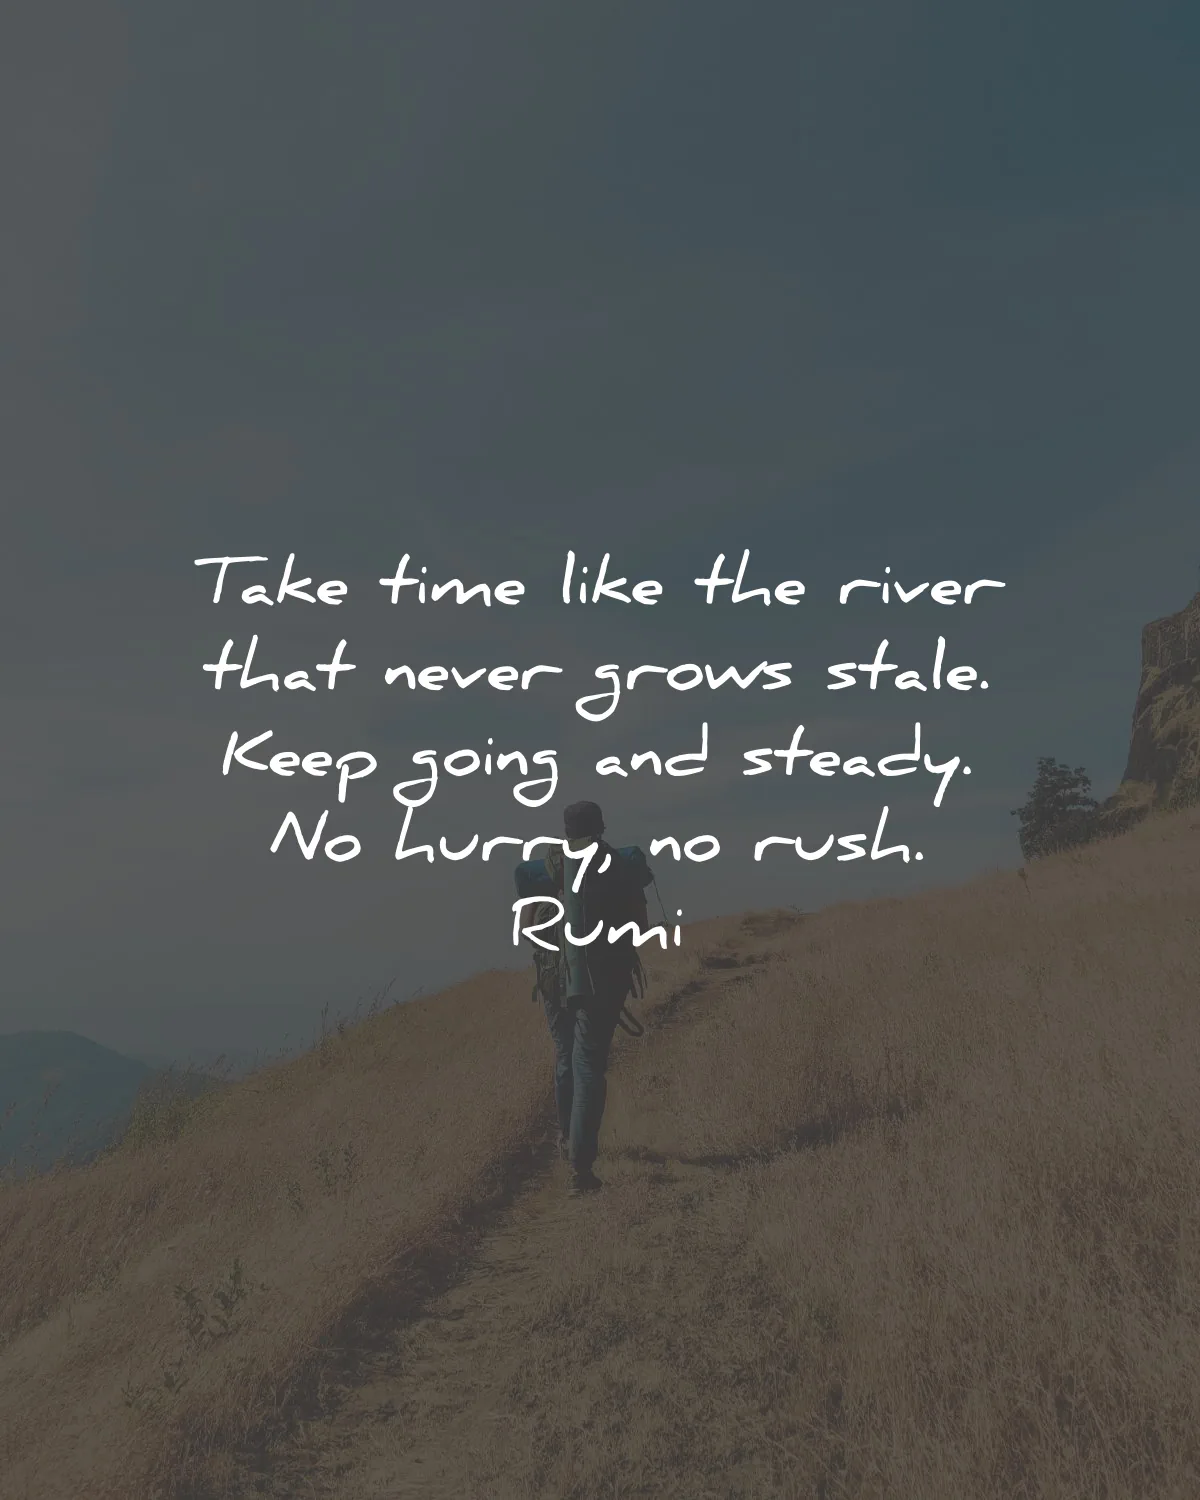 deep quotes take time river grows stale hurry rush rumi wisdom